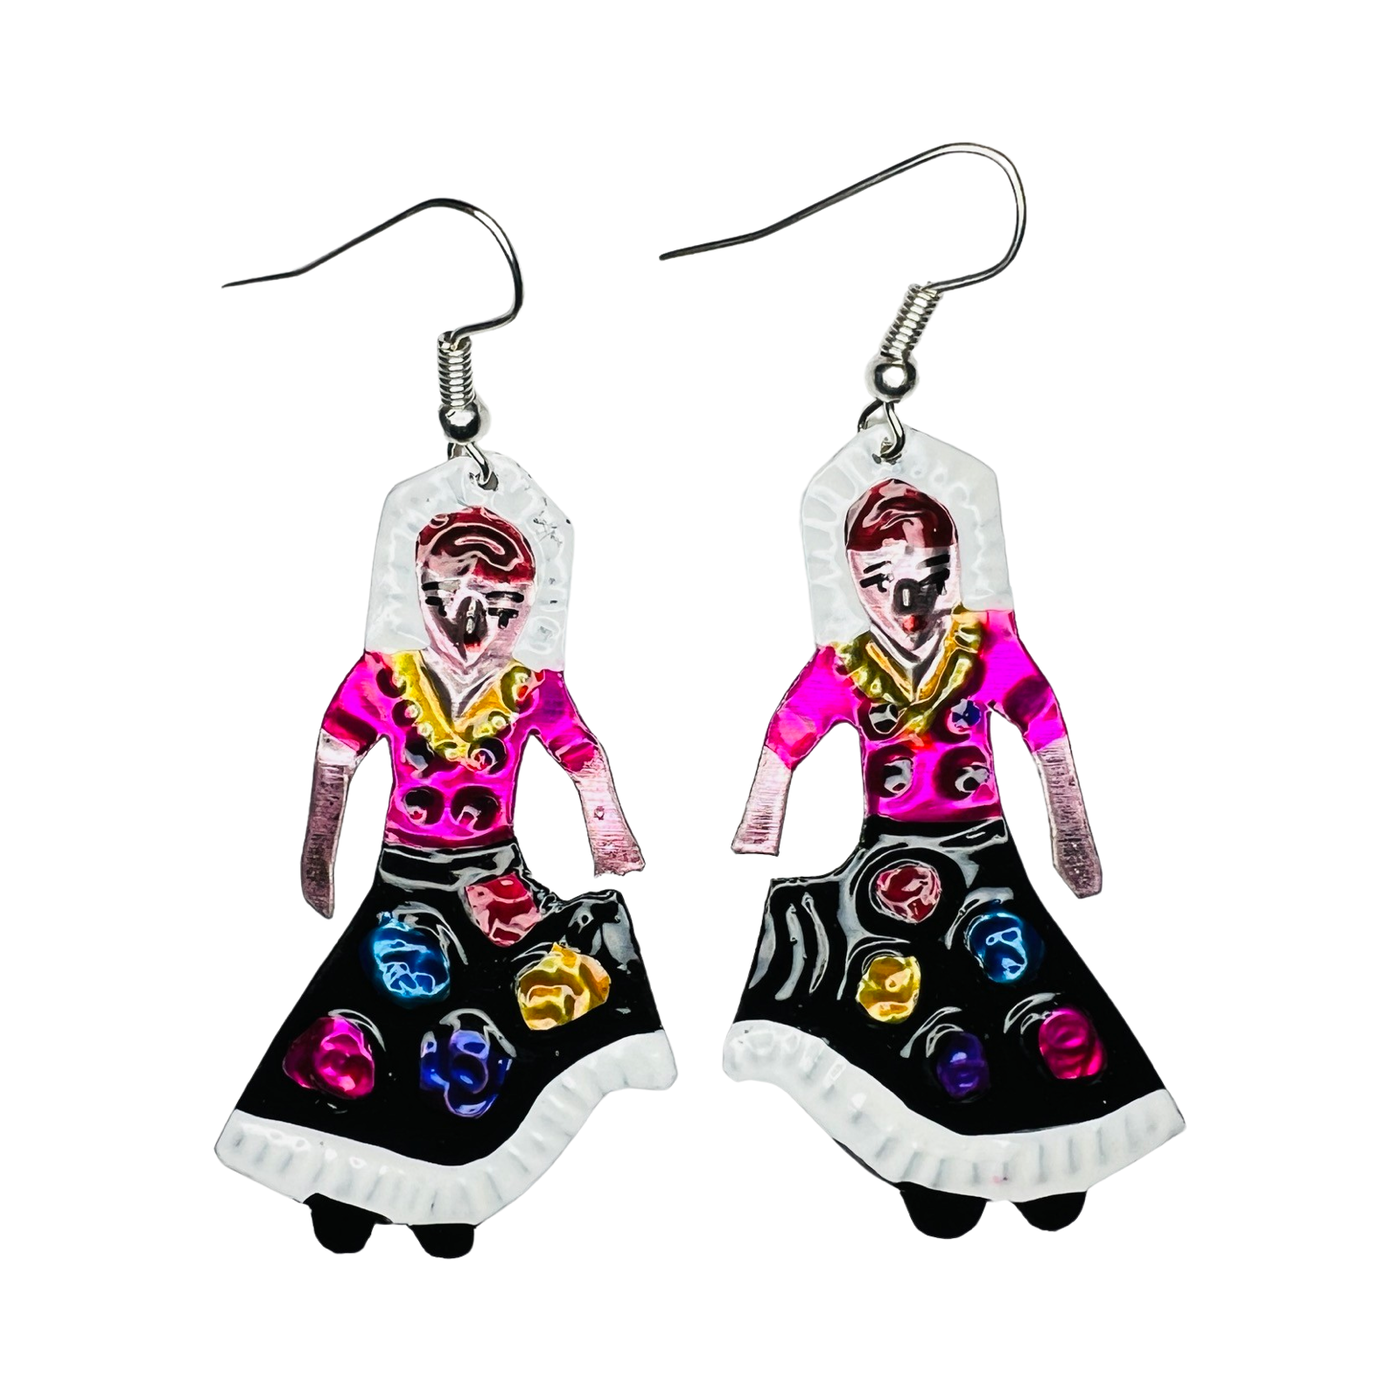 set of tin earrings featuring a woman in traditional Oaxacan attire.